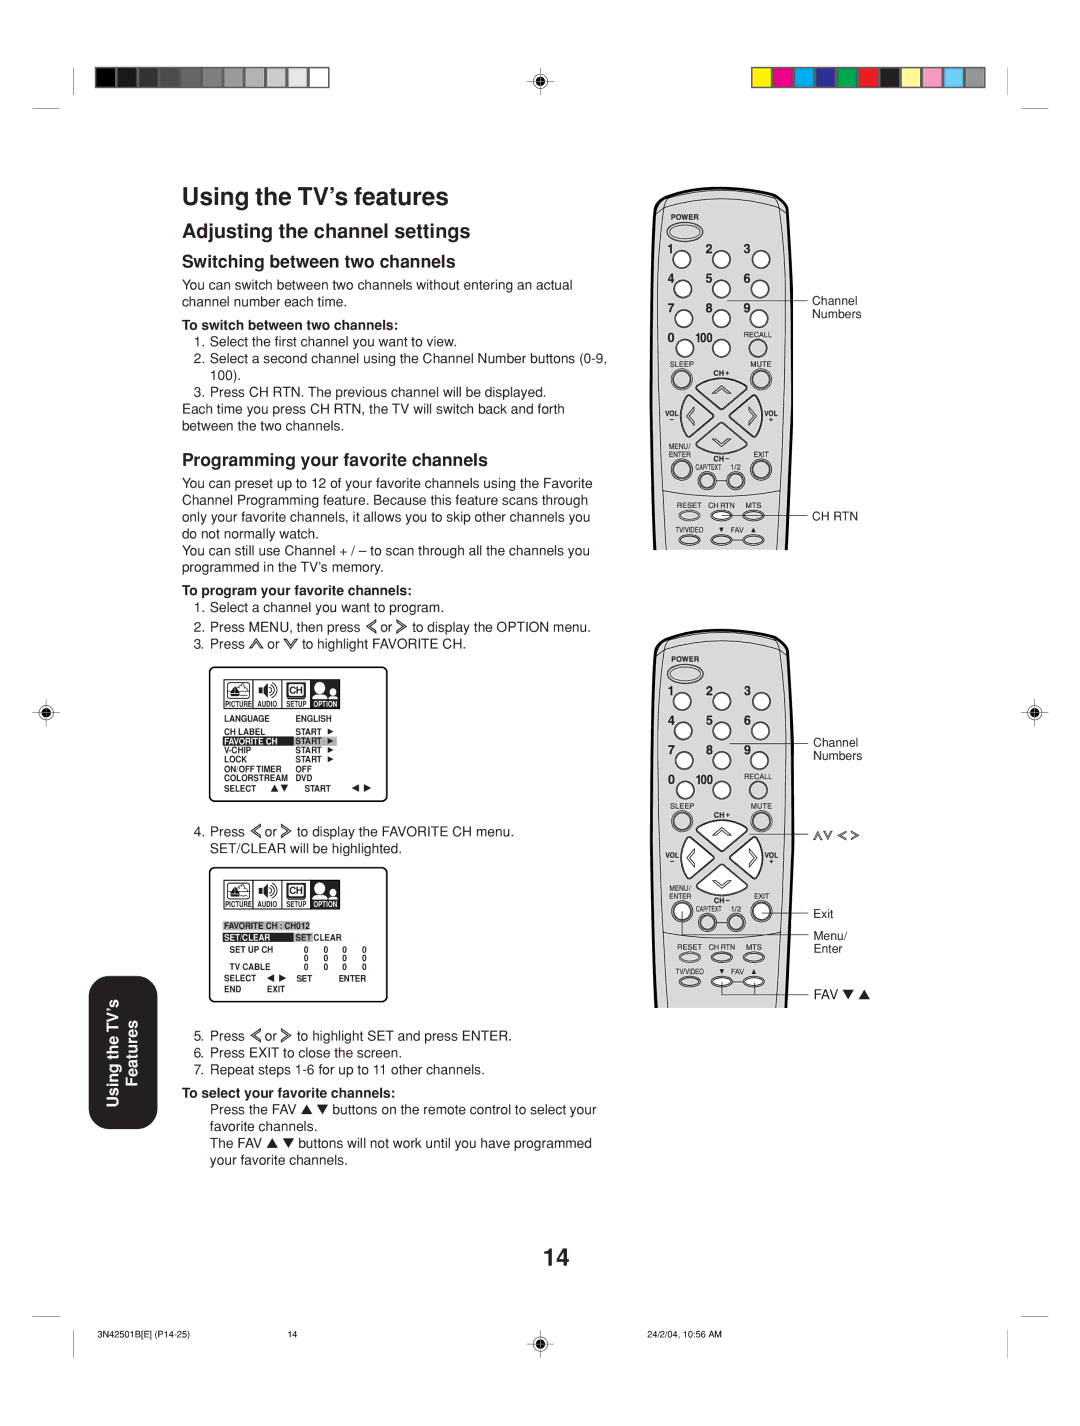 Toshiba 27A34 appendix Using the TV’s features, Adjusting the channel settings, Switching between two channels 